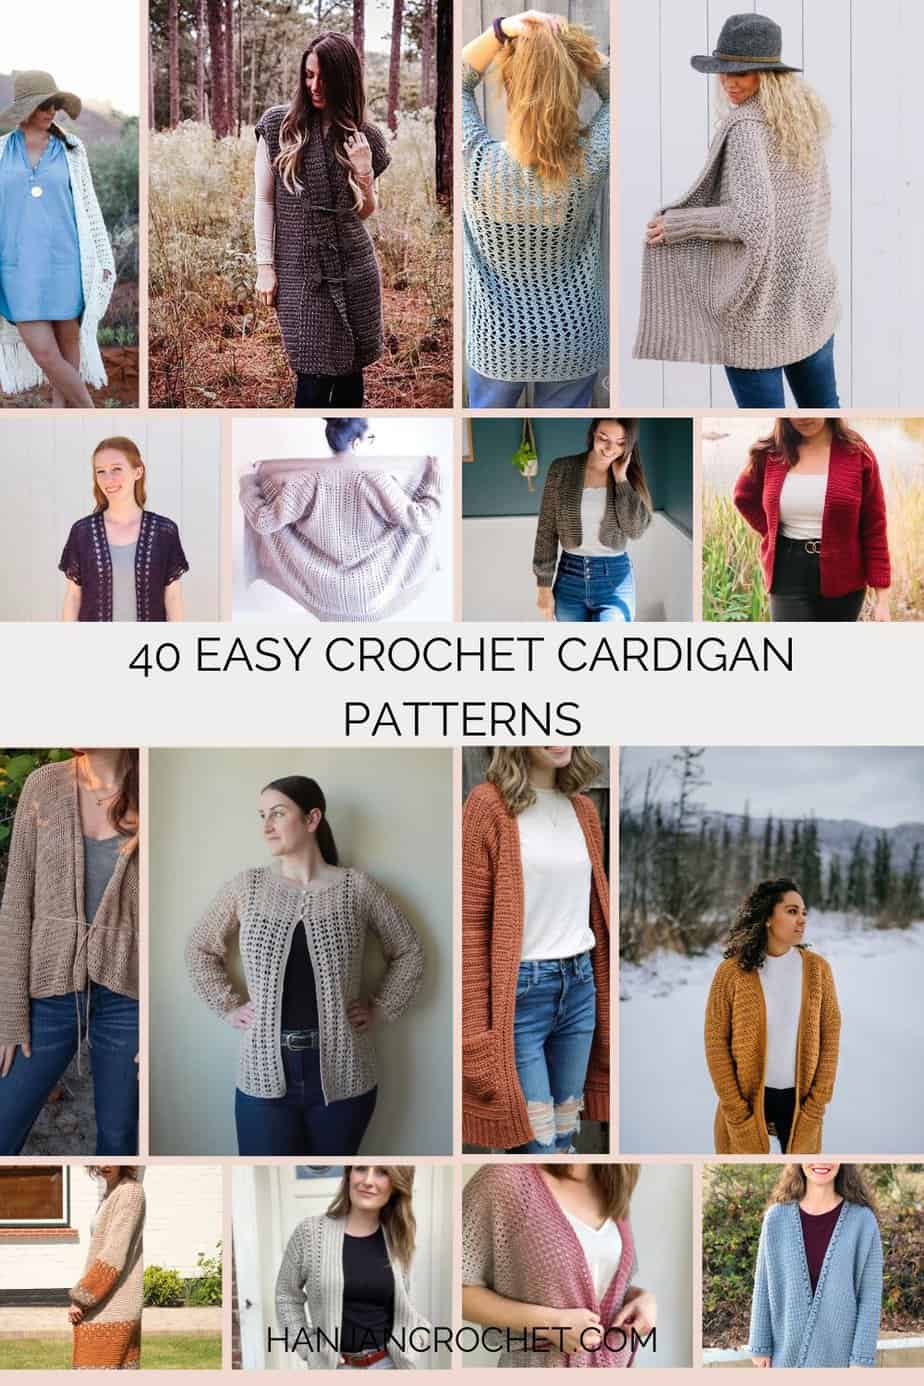 Image showing a selection of different crochet cardigan patterns for beginners.